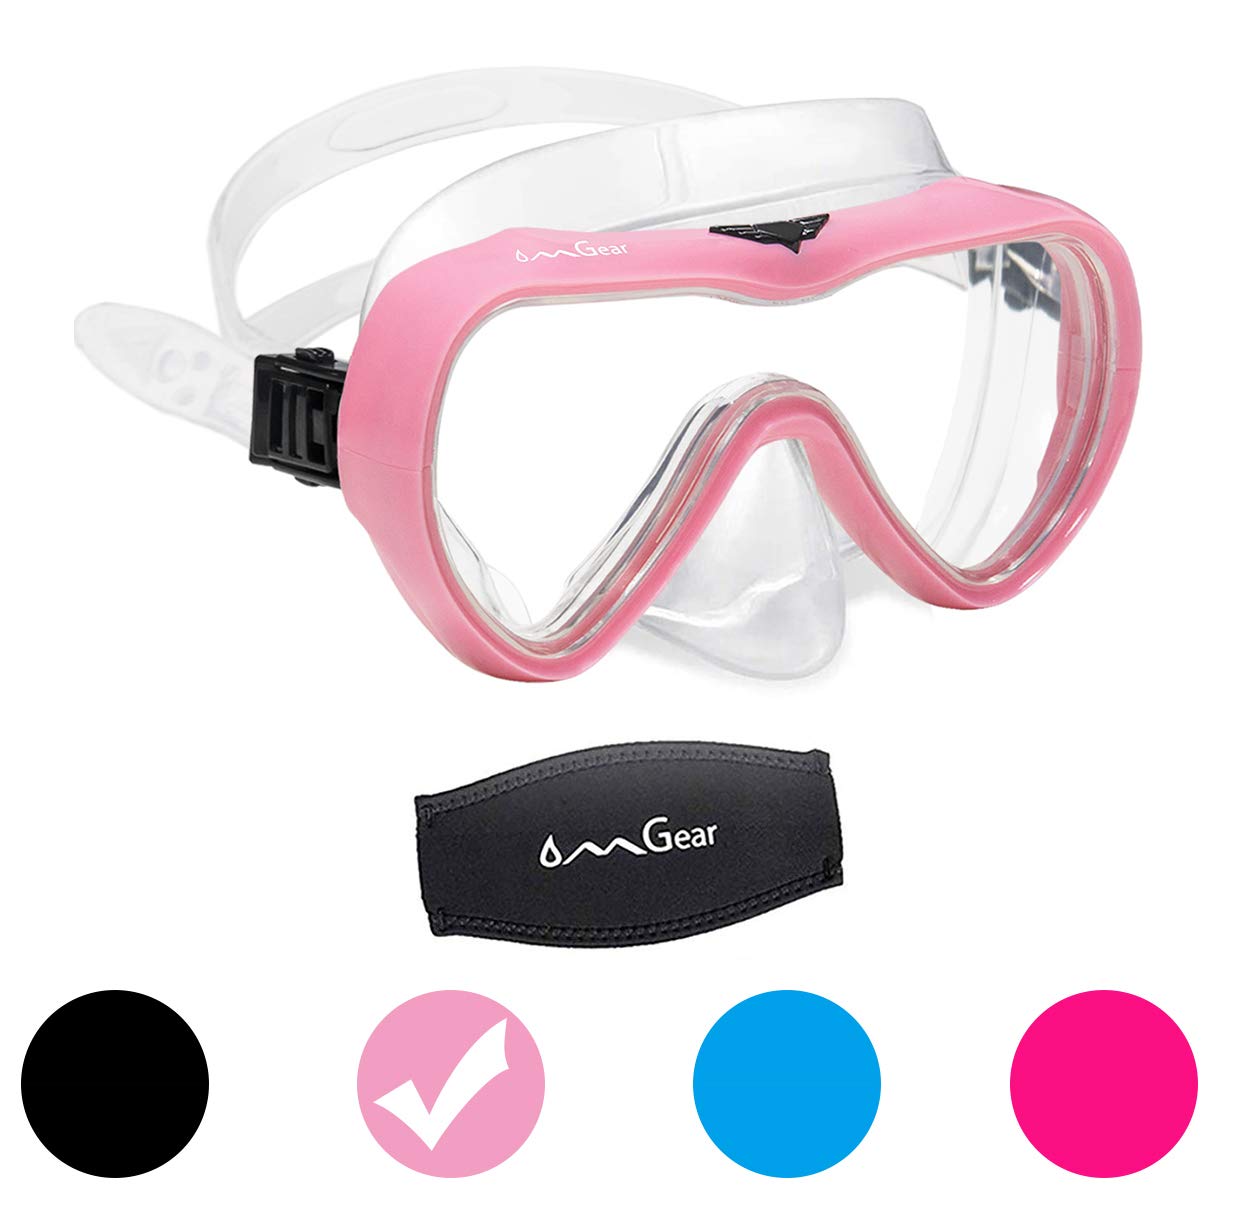 OMGear Diving Mask Snorkeling Gear Kids Adult Snorkel Mask Dive Goggles  Silicone Swim Glasses with Nose Cover for Scuba Free Diving Spearfishing  Neoprene Strap Cover Impact Resistance Pink